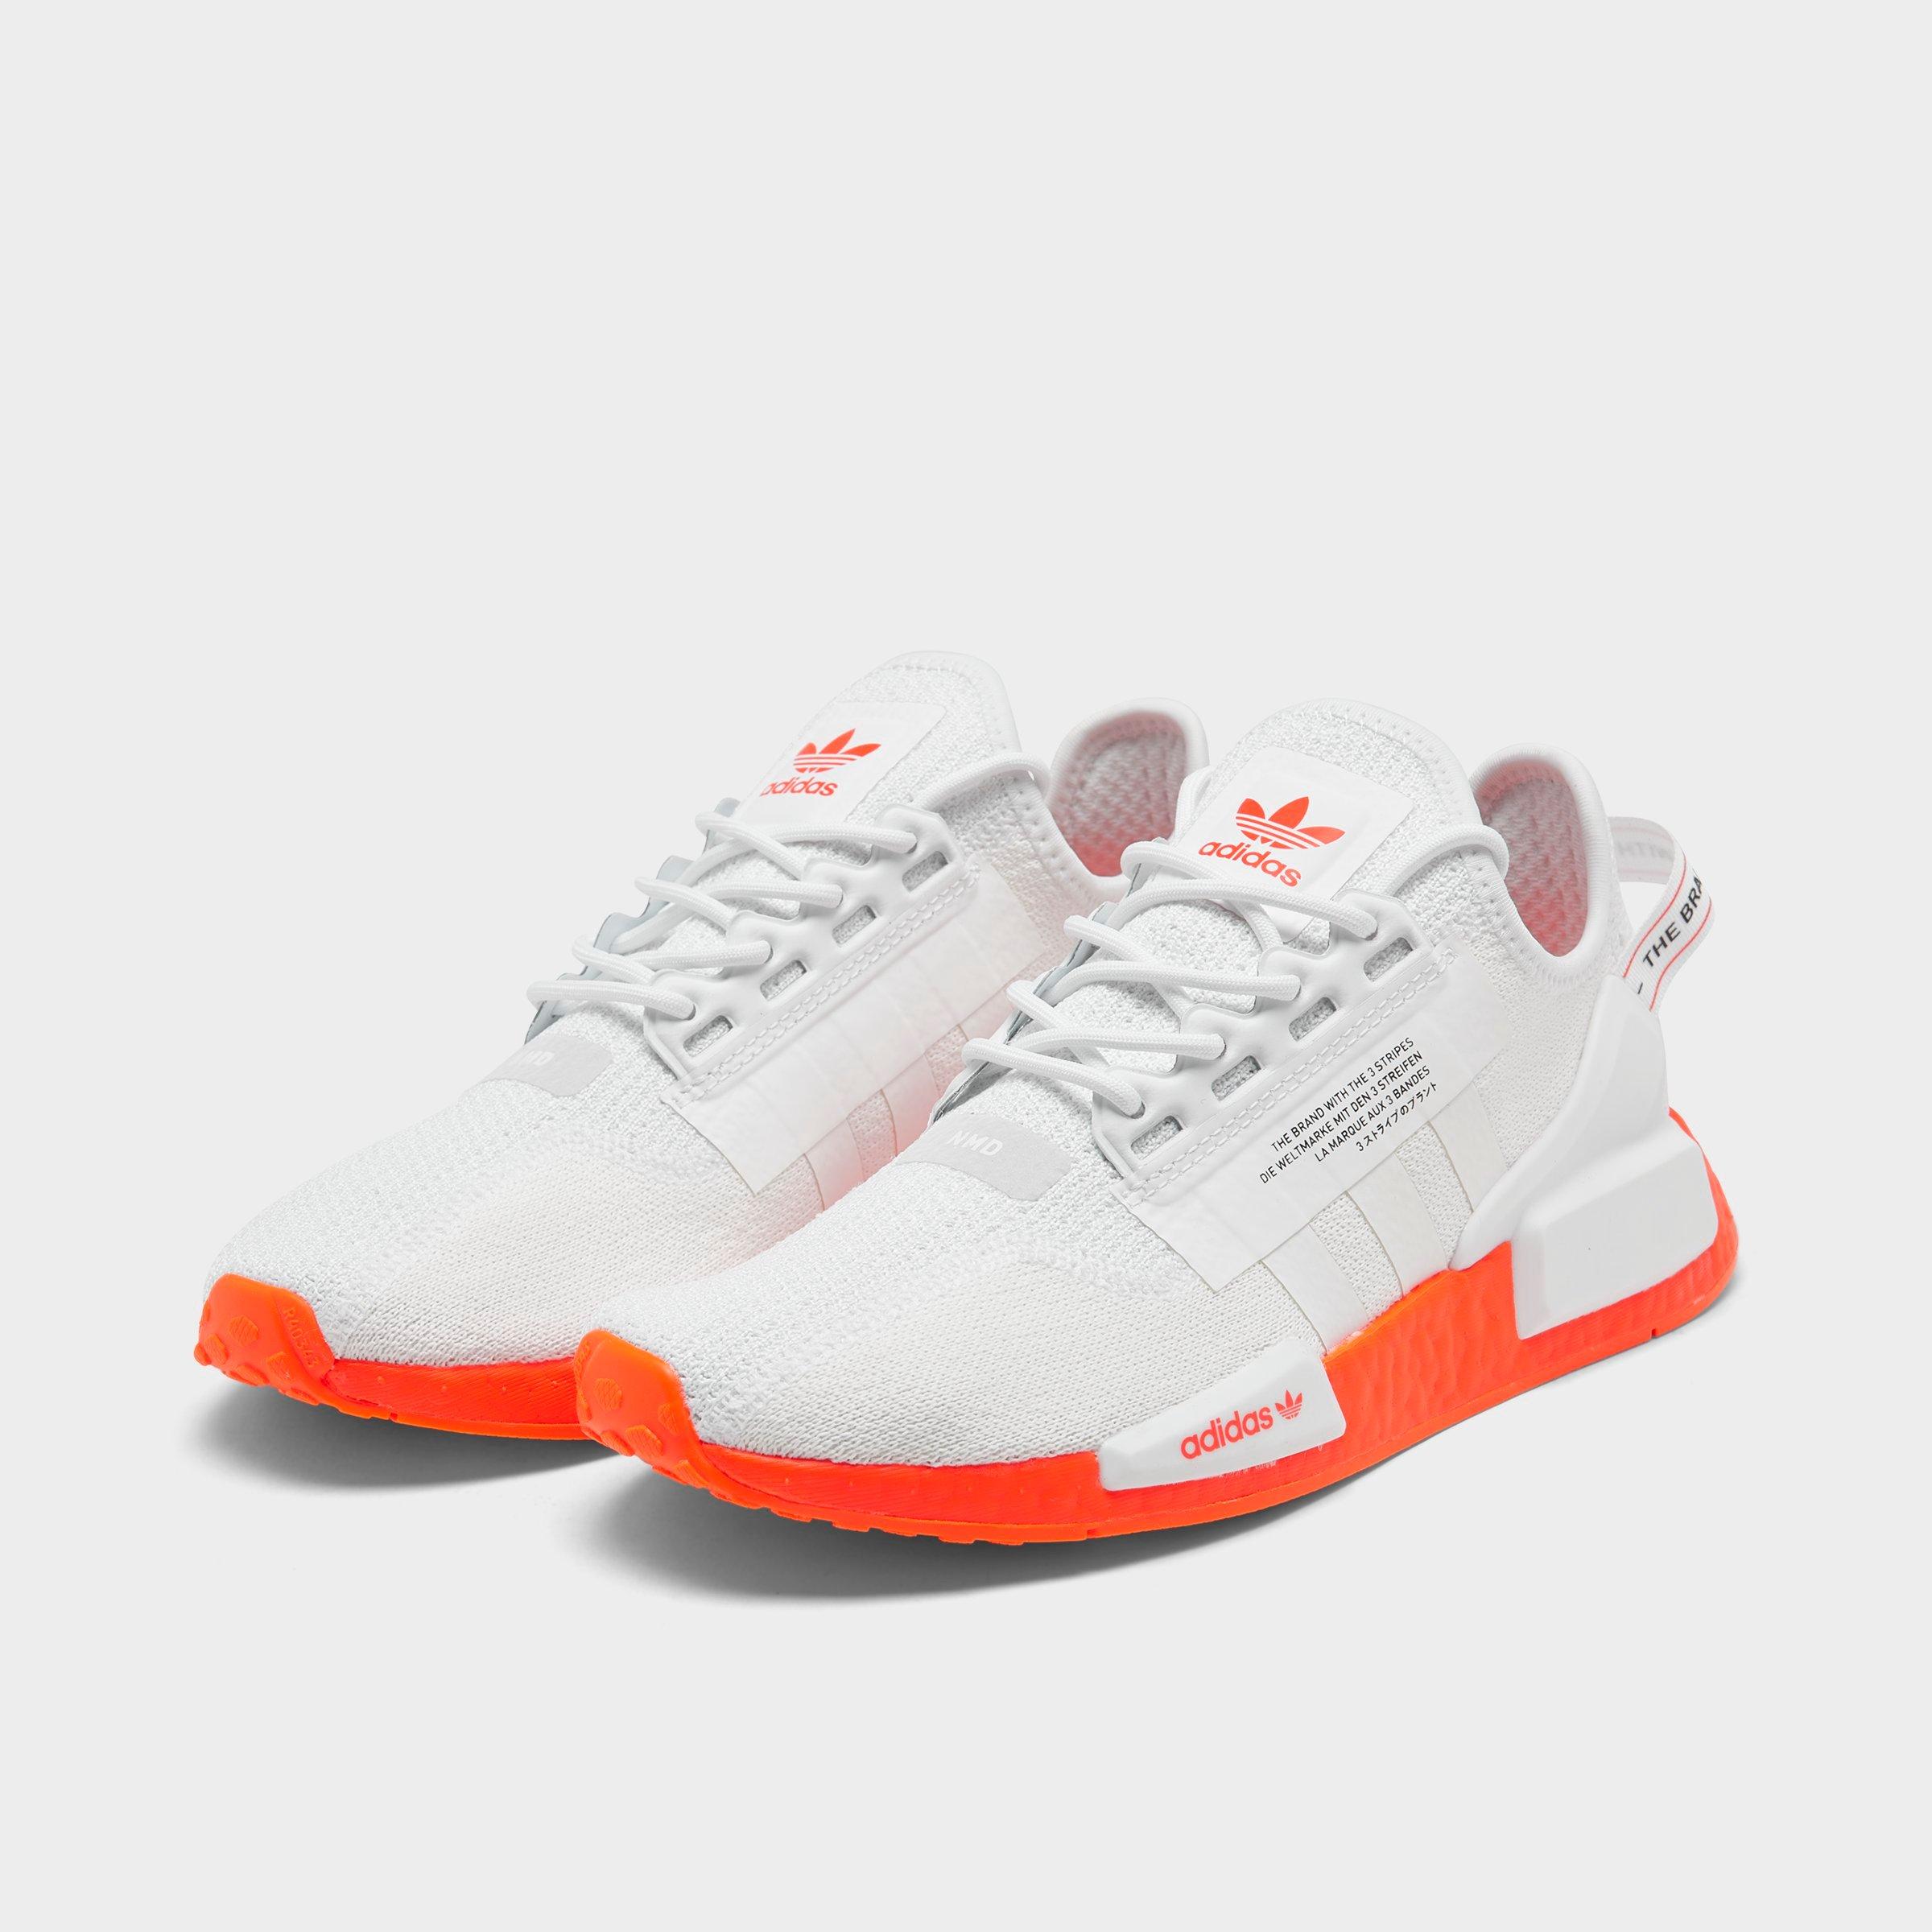 Adidas nmd r1 white search at Heurekask